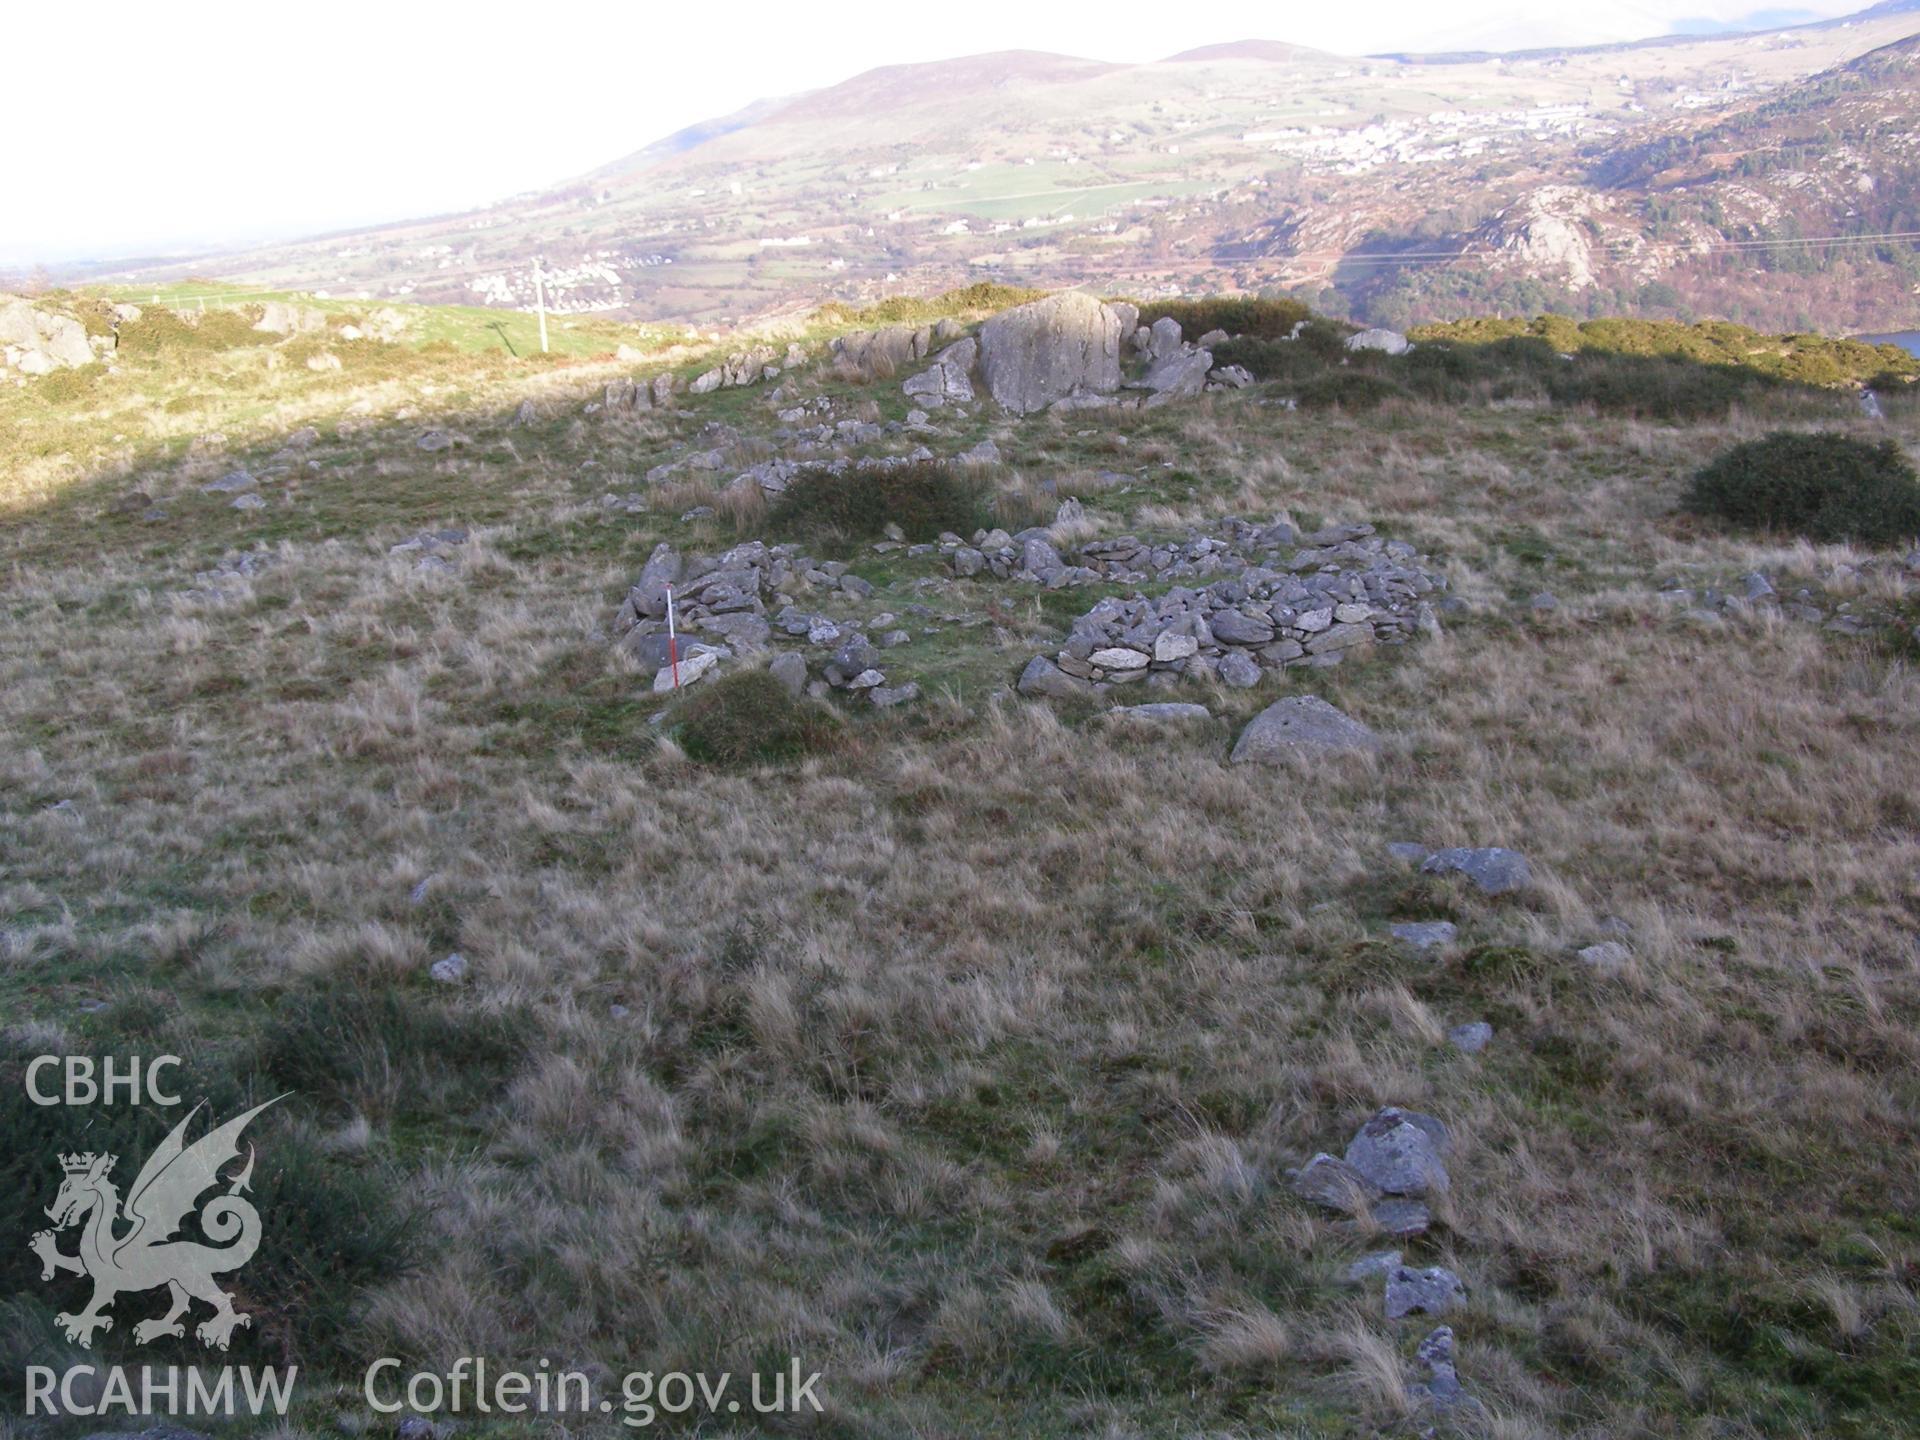 Digital colour photograph of Gallt y Celyn hut circle settlement taken on 13/12/2007 by P.J. Schofield during the Snowdon North West Upland Survey undertaken by Oxford Archaeology North.